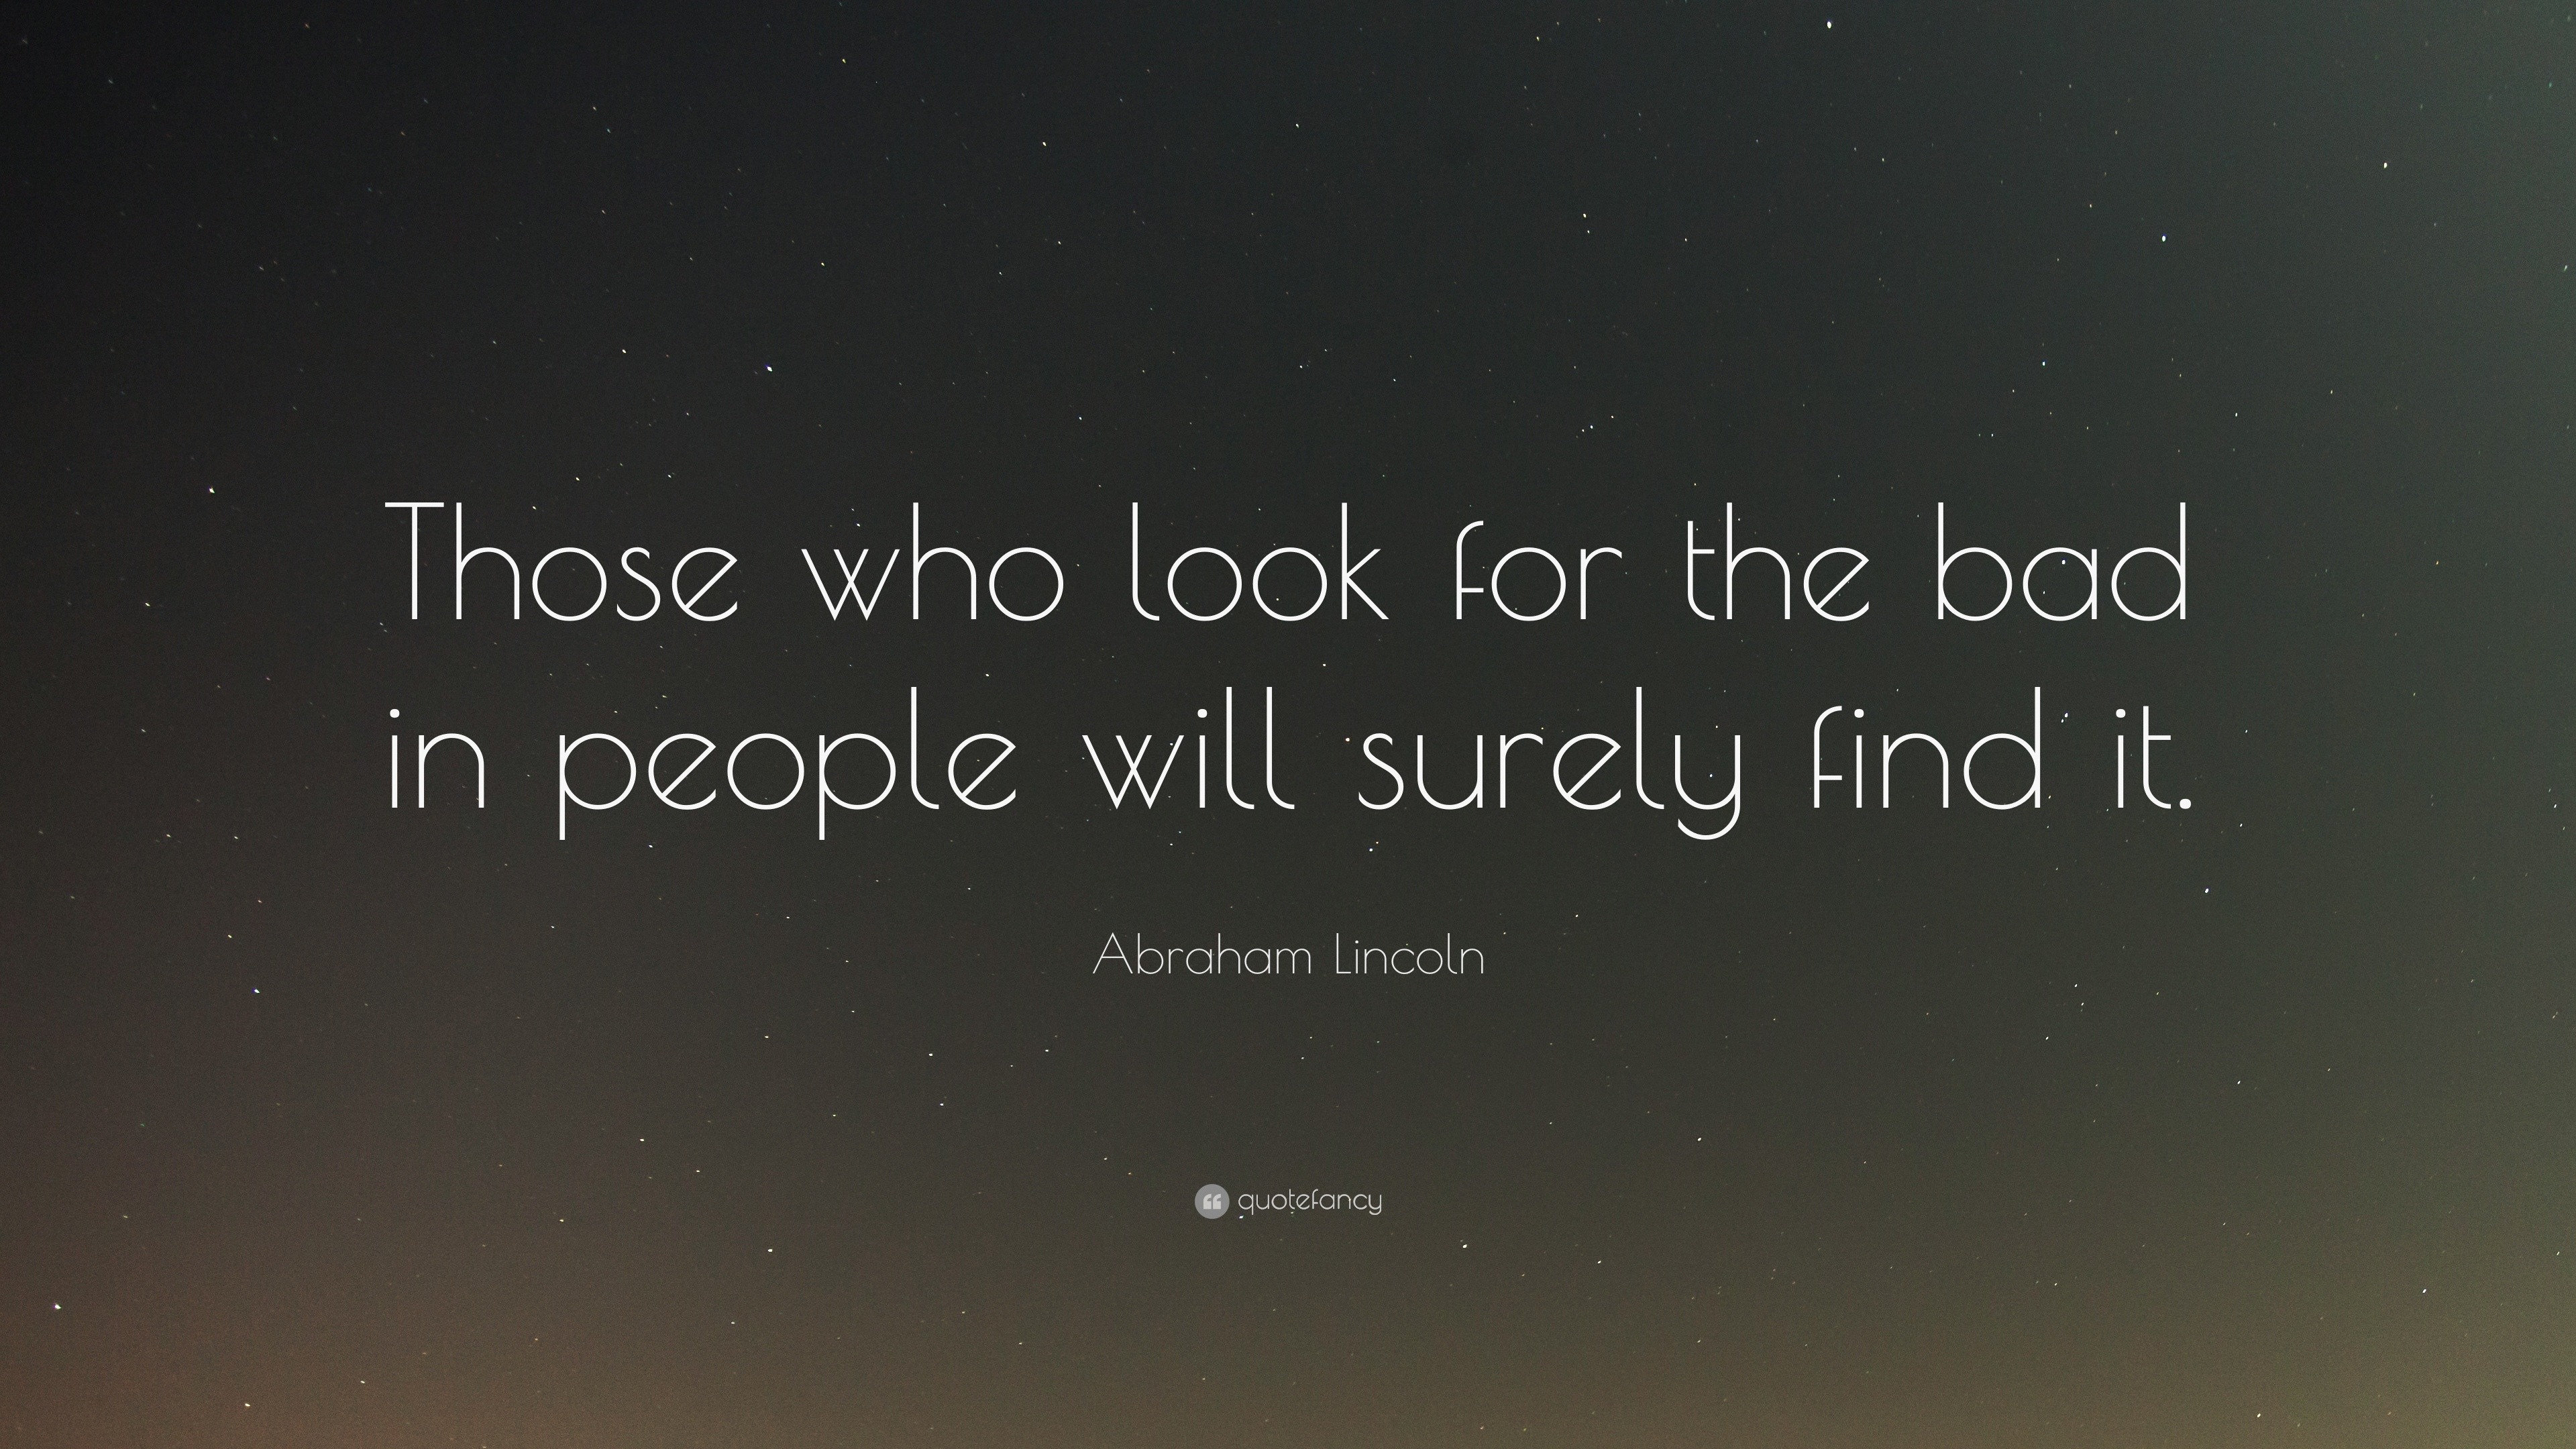 936-Abraham-Lincoln-Quote-Those-who-look-for-the-bad-in-people-will.jpg